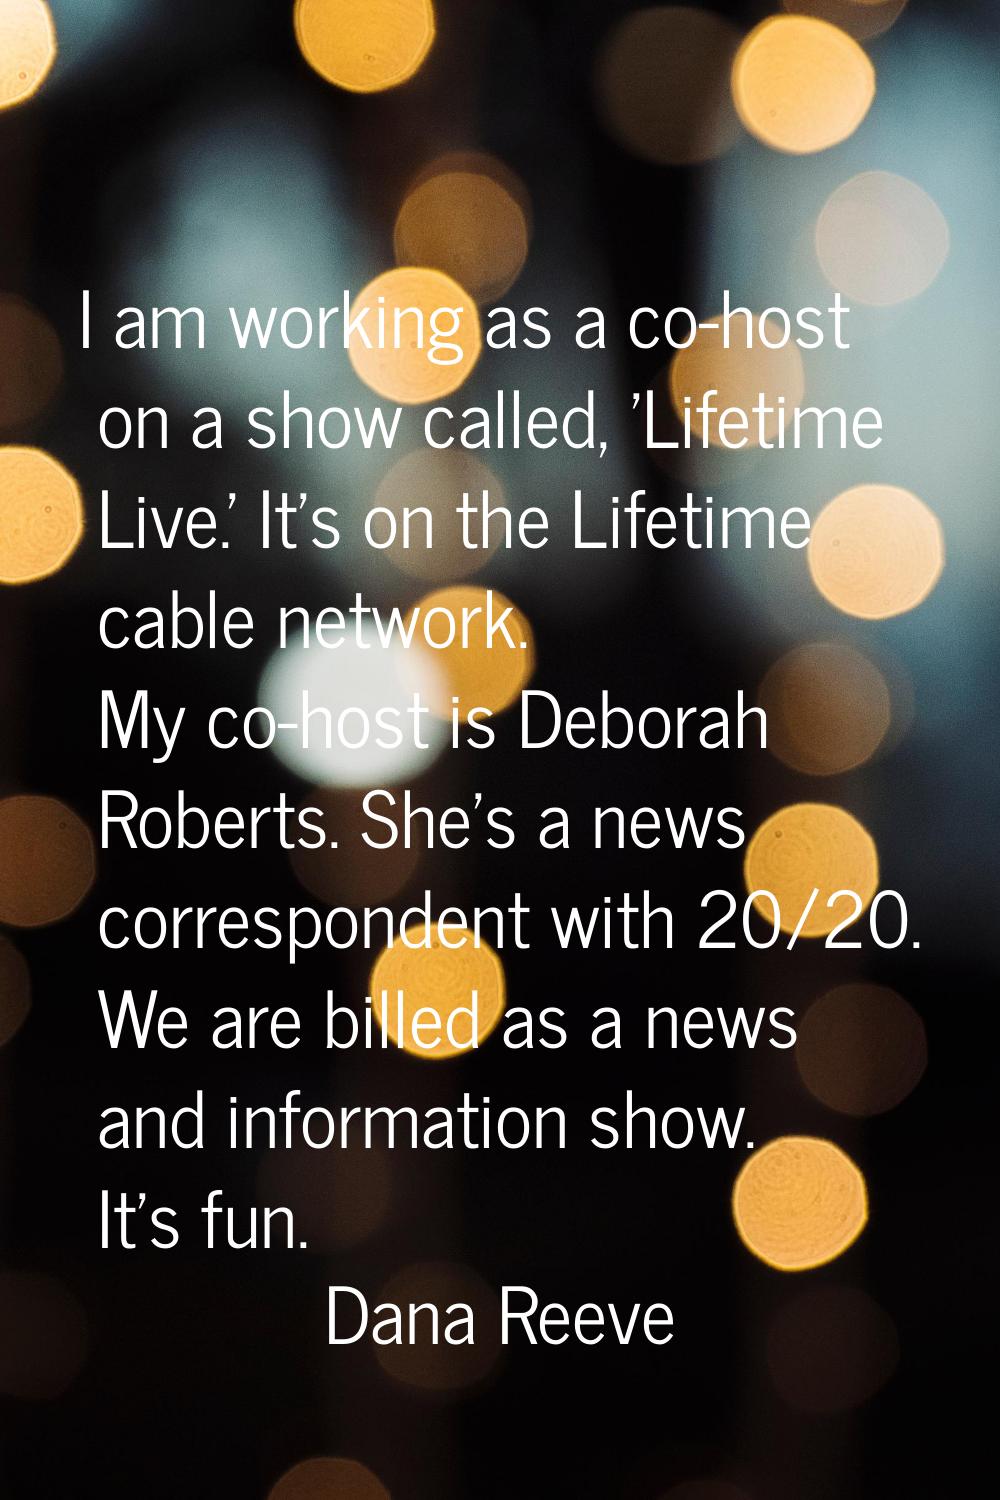 I am working as a co-host on a show called, 'Lifetime Live.' It's on the Lifetime cable network. My